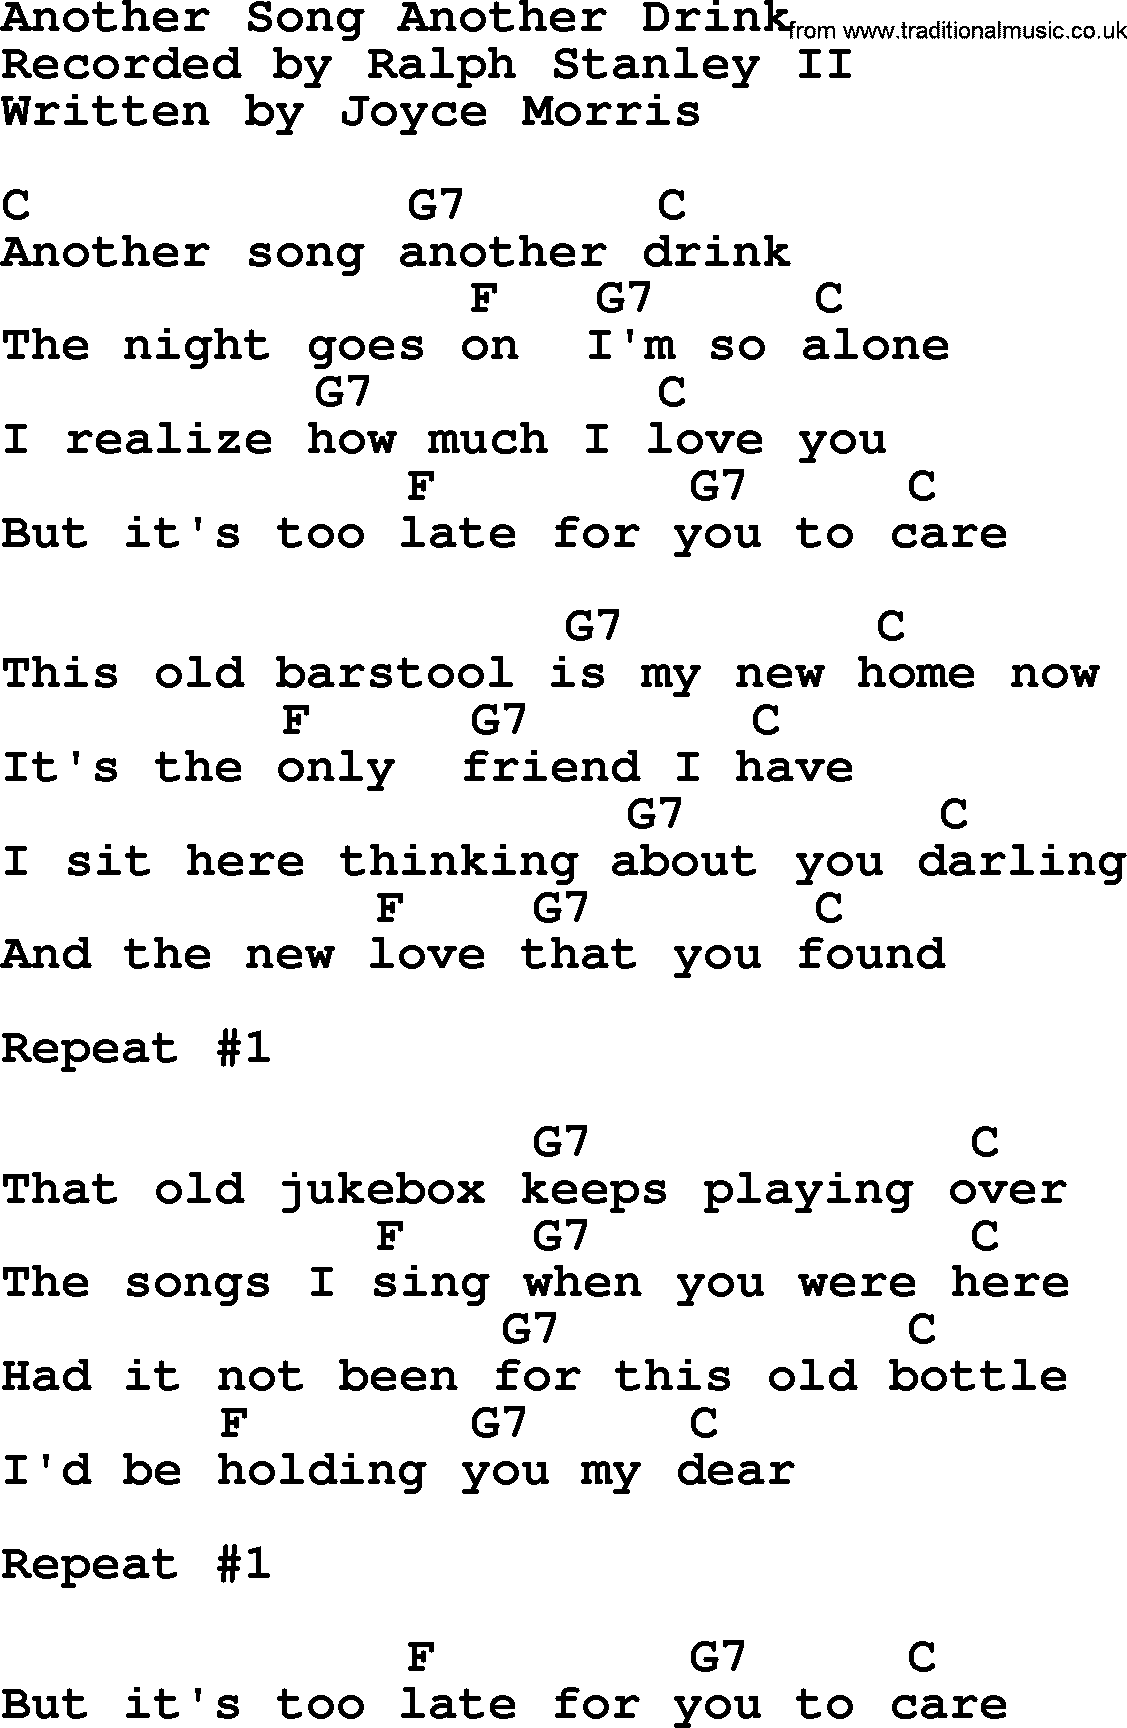 Bluegrass song: Another Song Another Drink, lyrics and chords